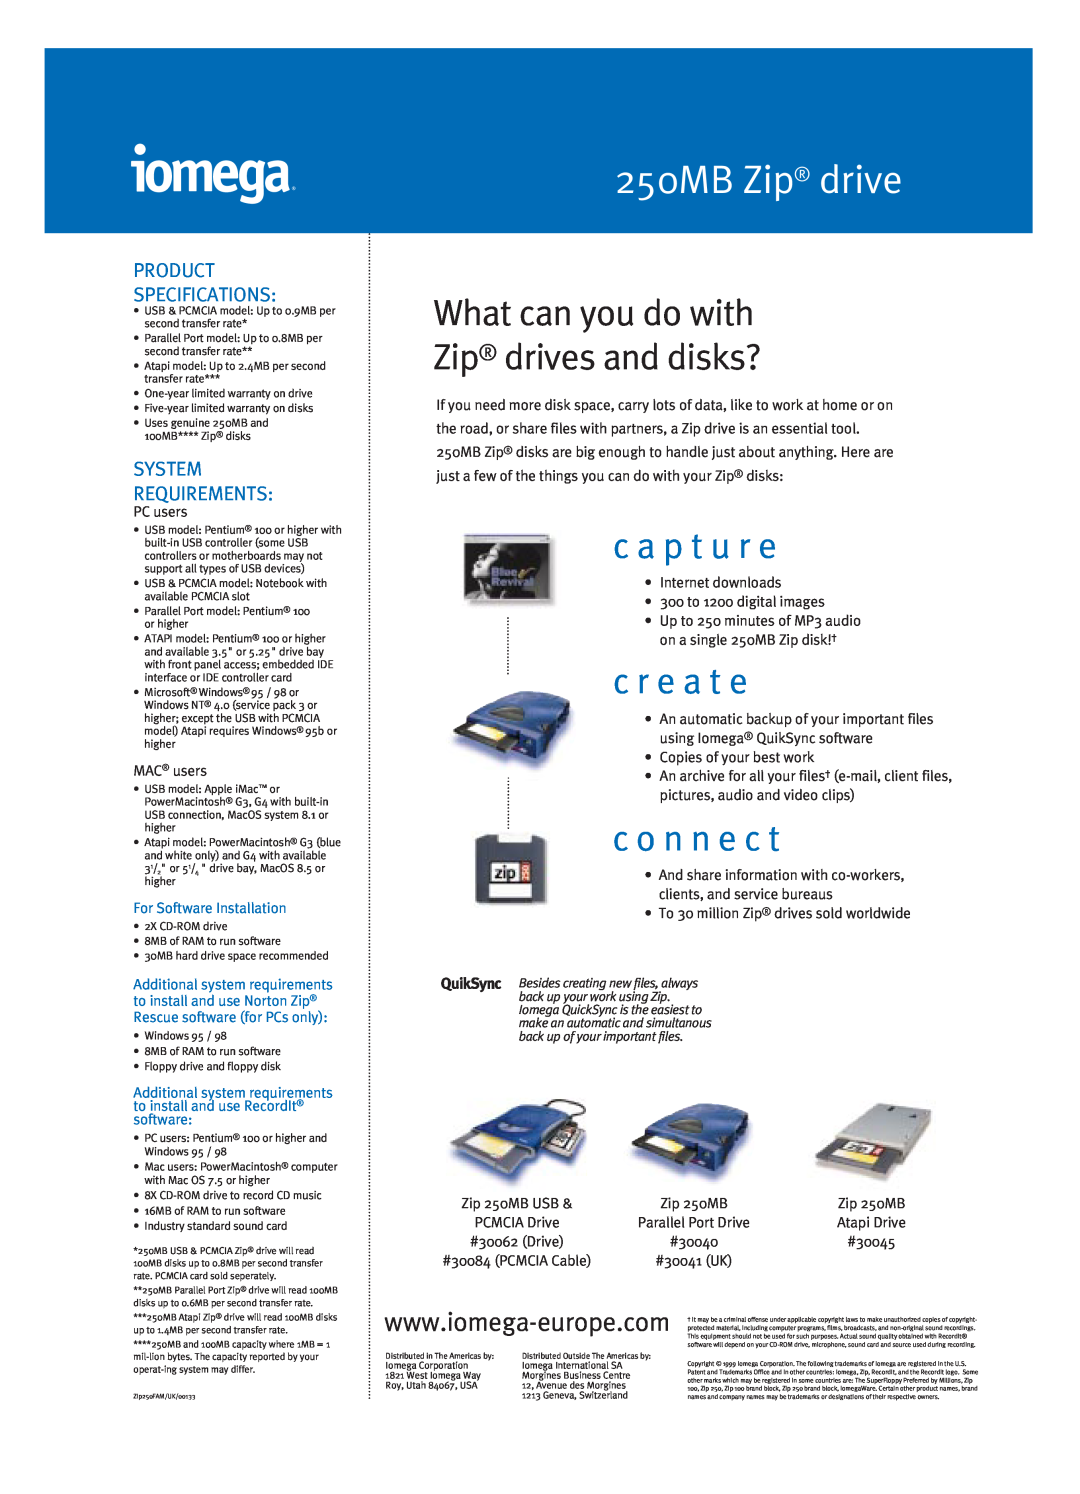 Iomega manual What can you do with Zip¨ drives and disks?, 250MB Zip¨ drive, c a p t u r e, c r e a t e, c o n n e c t 